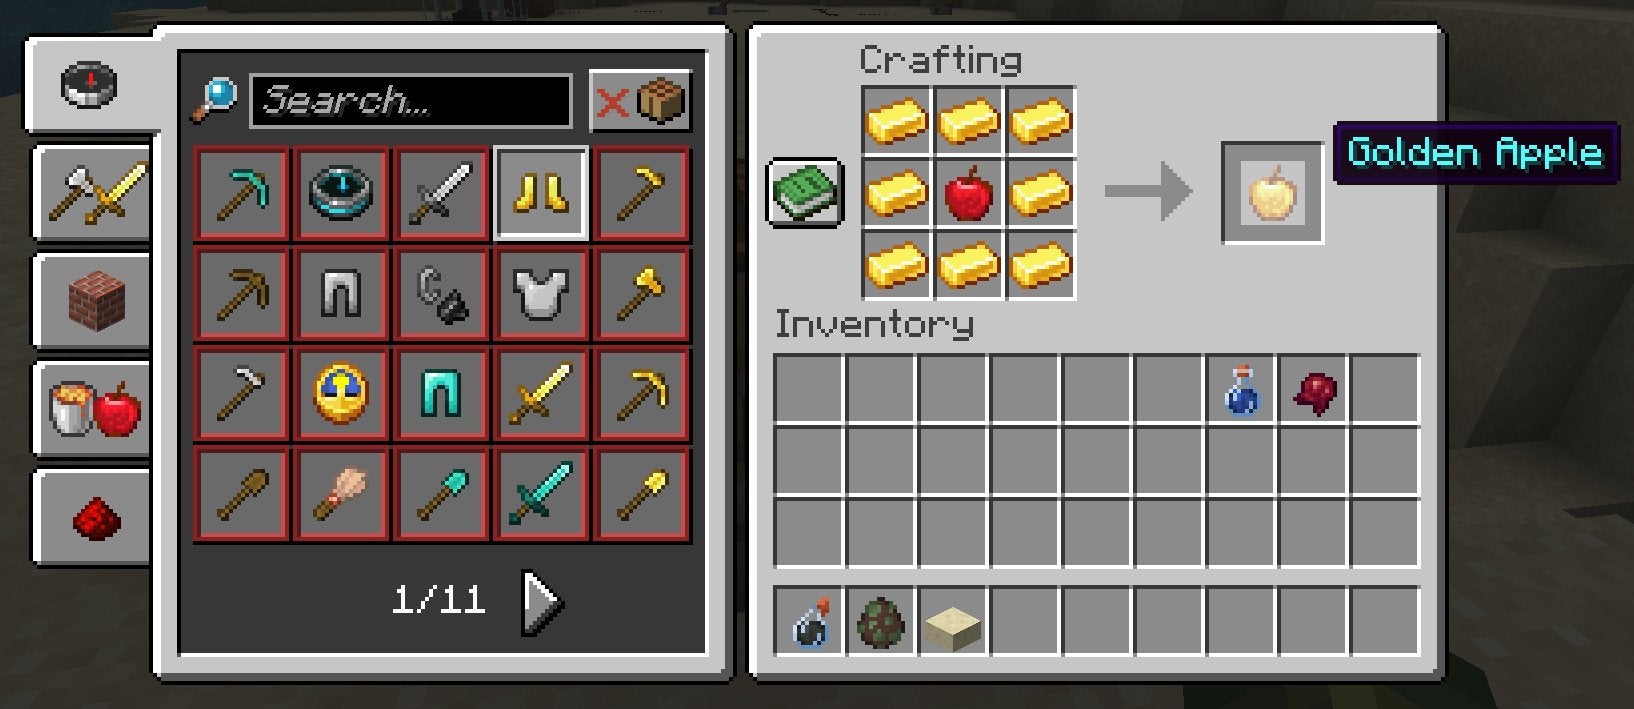 The player crafting a Golden Apple in Minecraft.